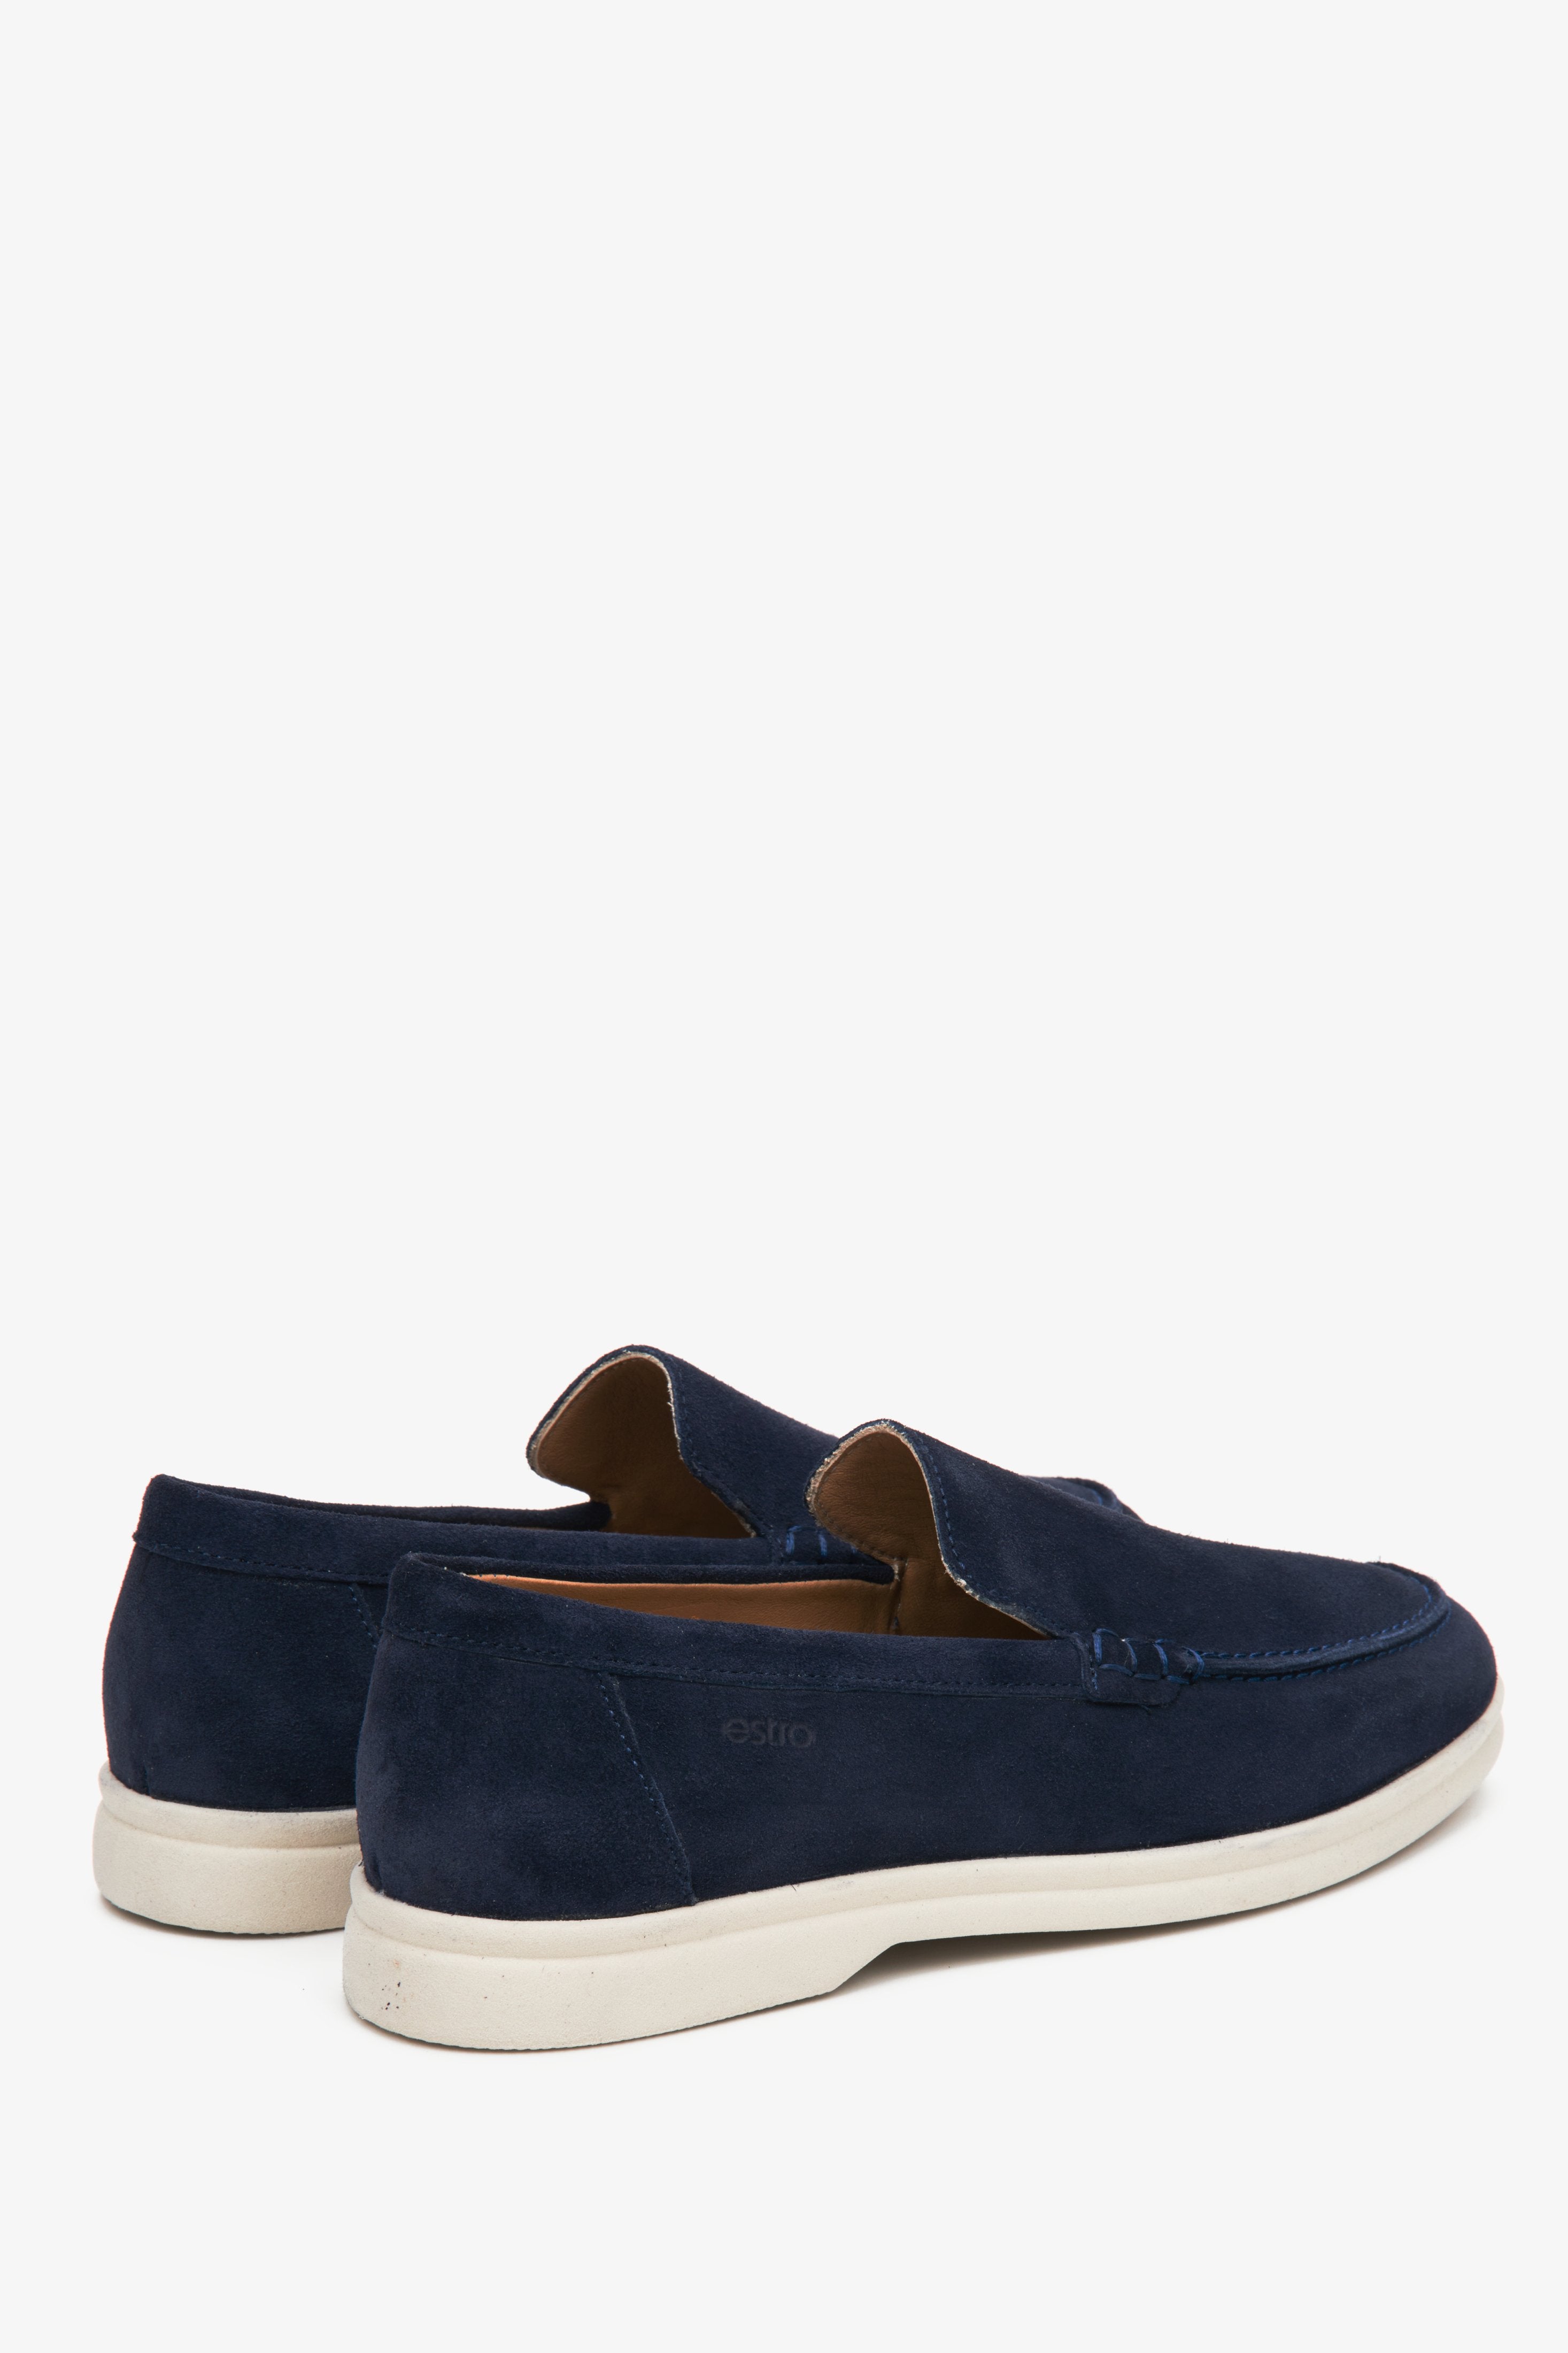 Feminine navy blue velour loafers - presentation of the heel counter and shoe sideline.